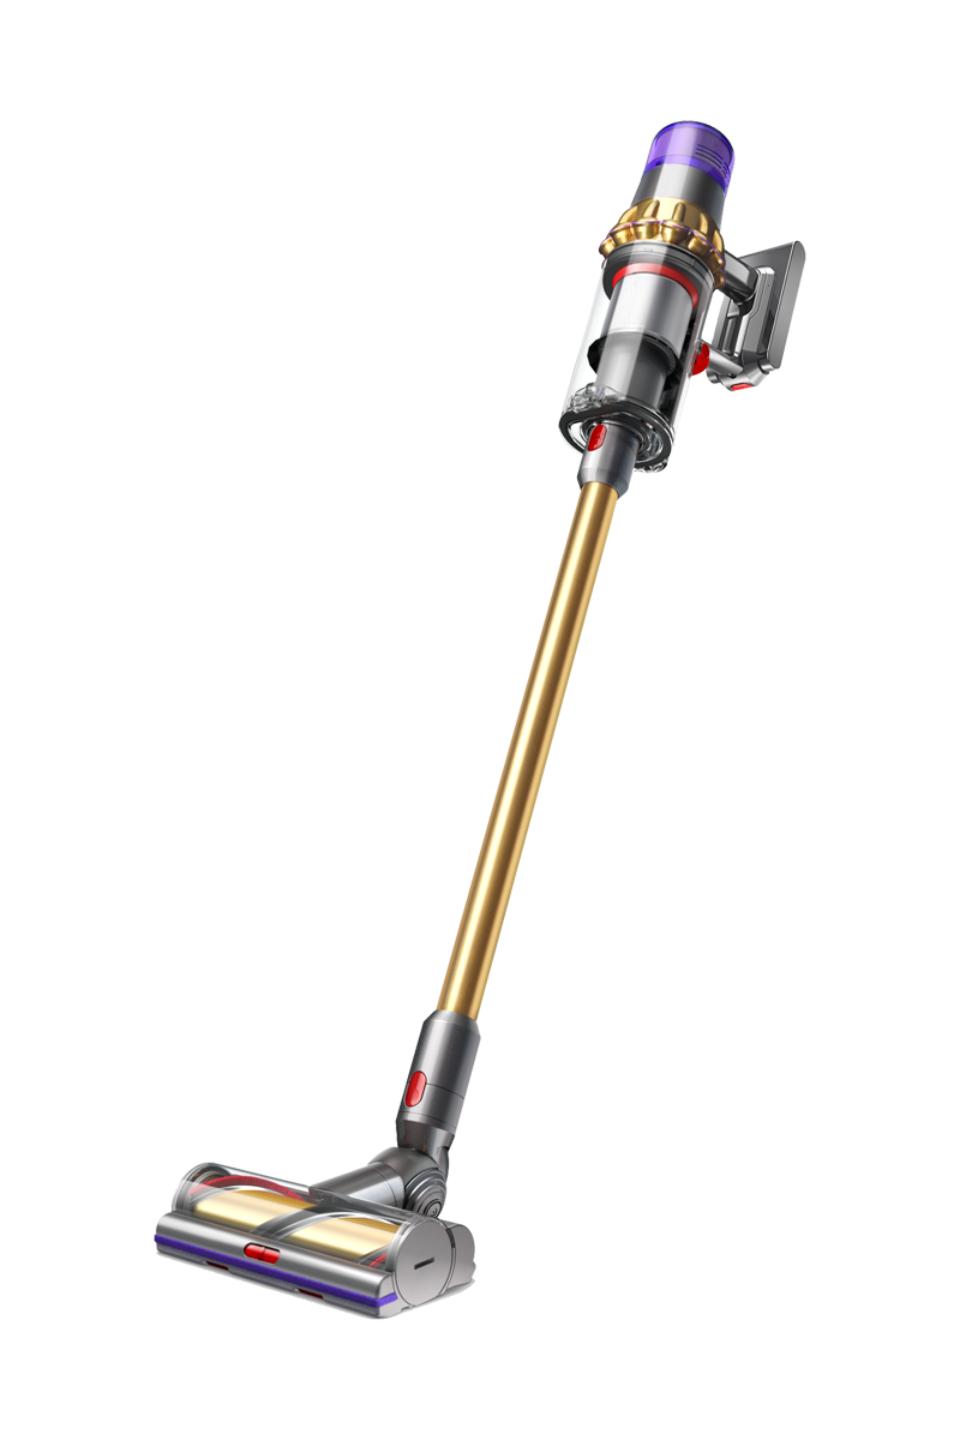 Dyson V11 Absolute Extra Pro kabelloser Staubsauger gold